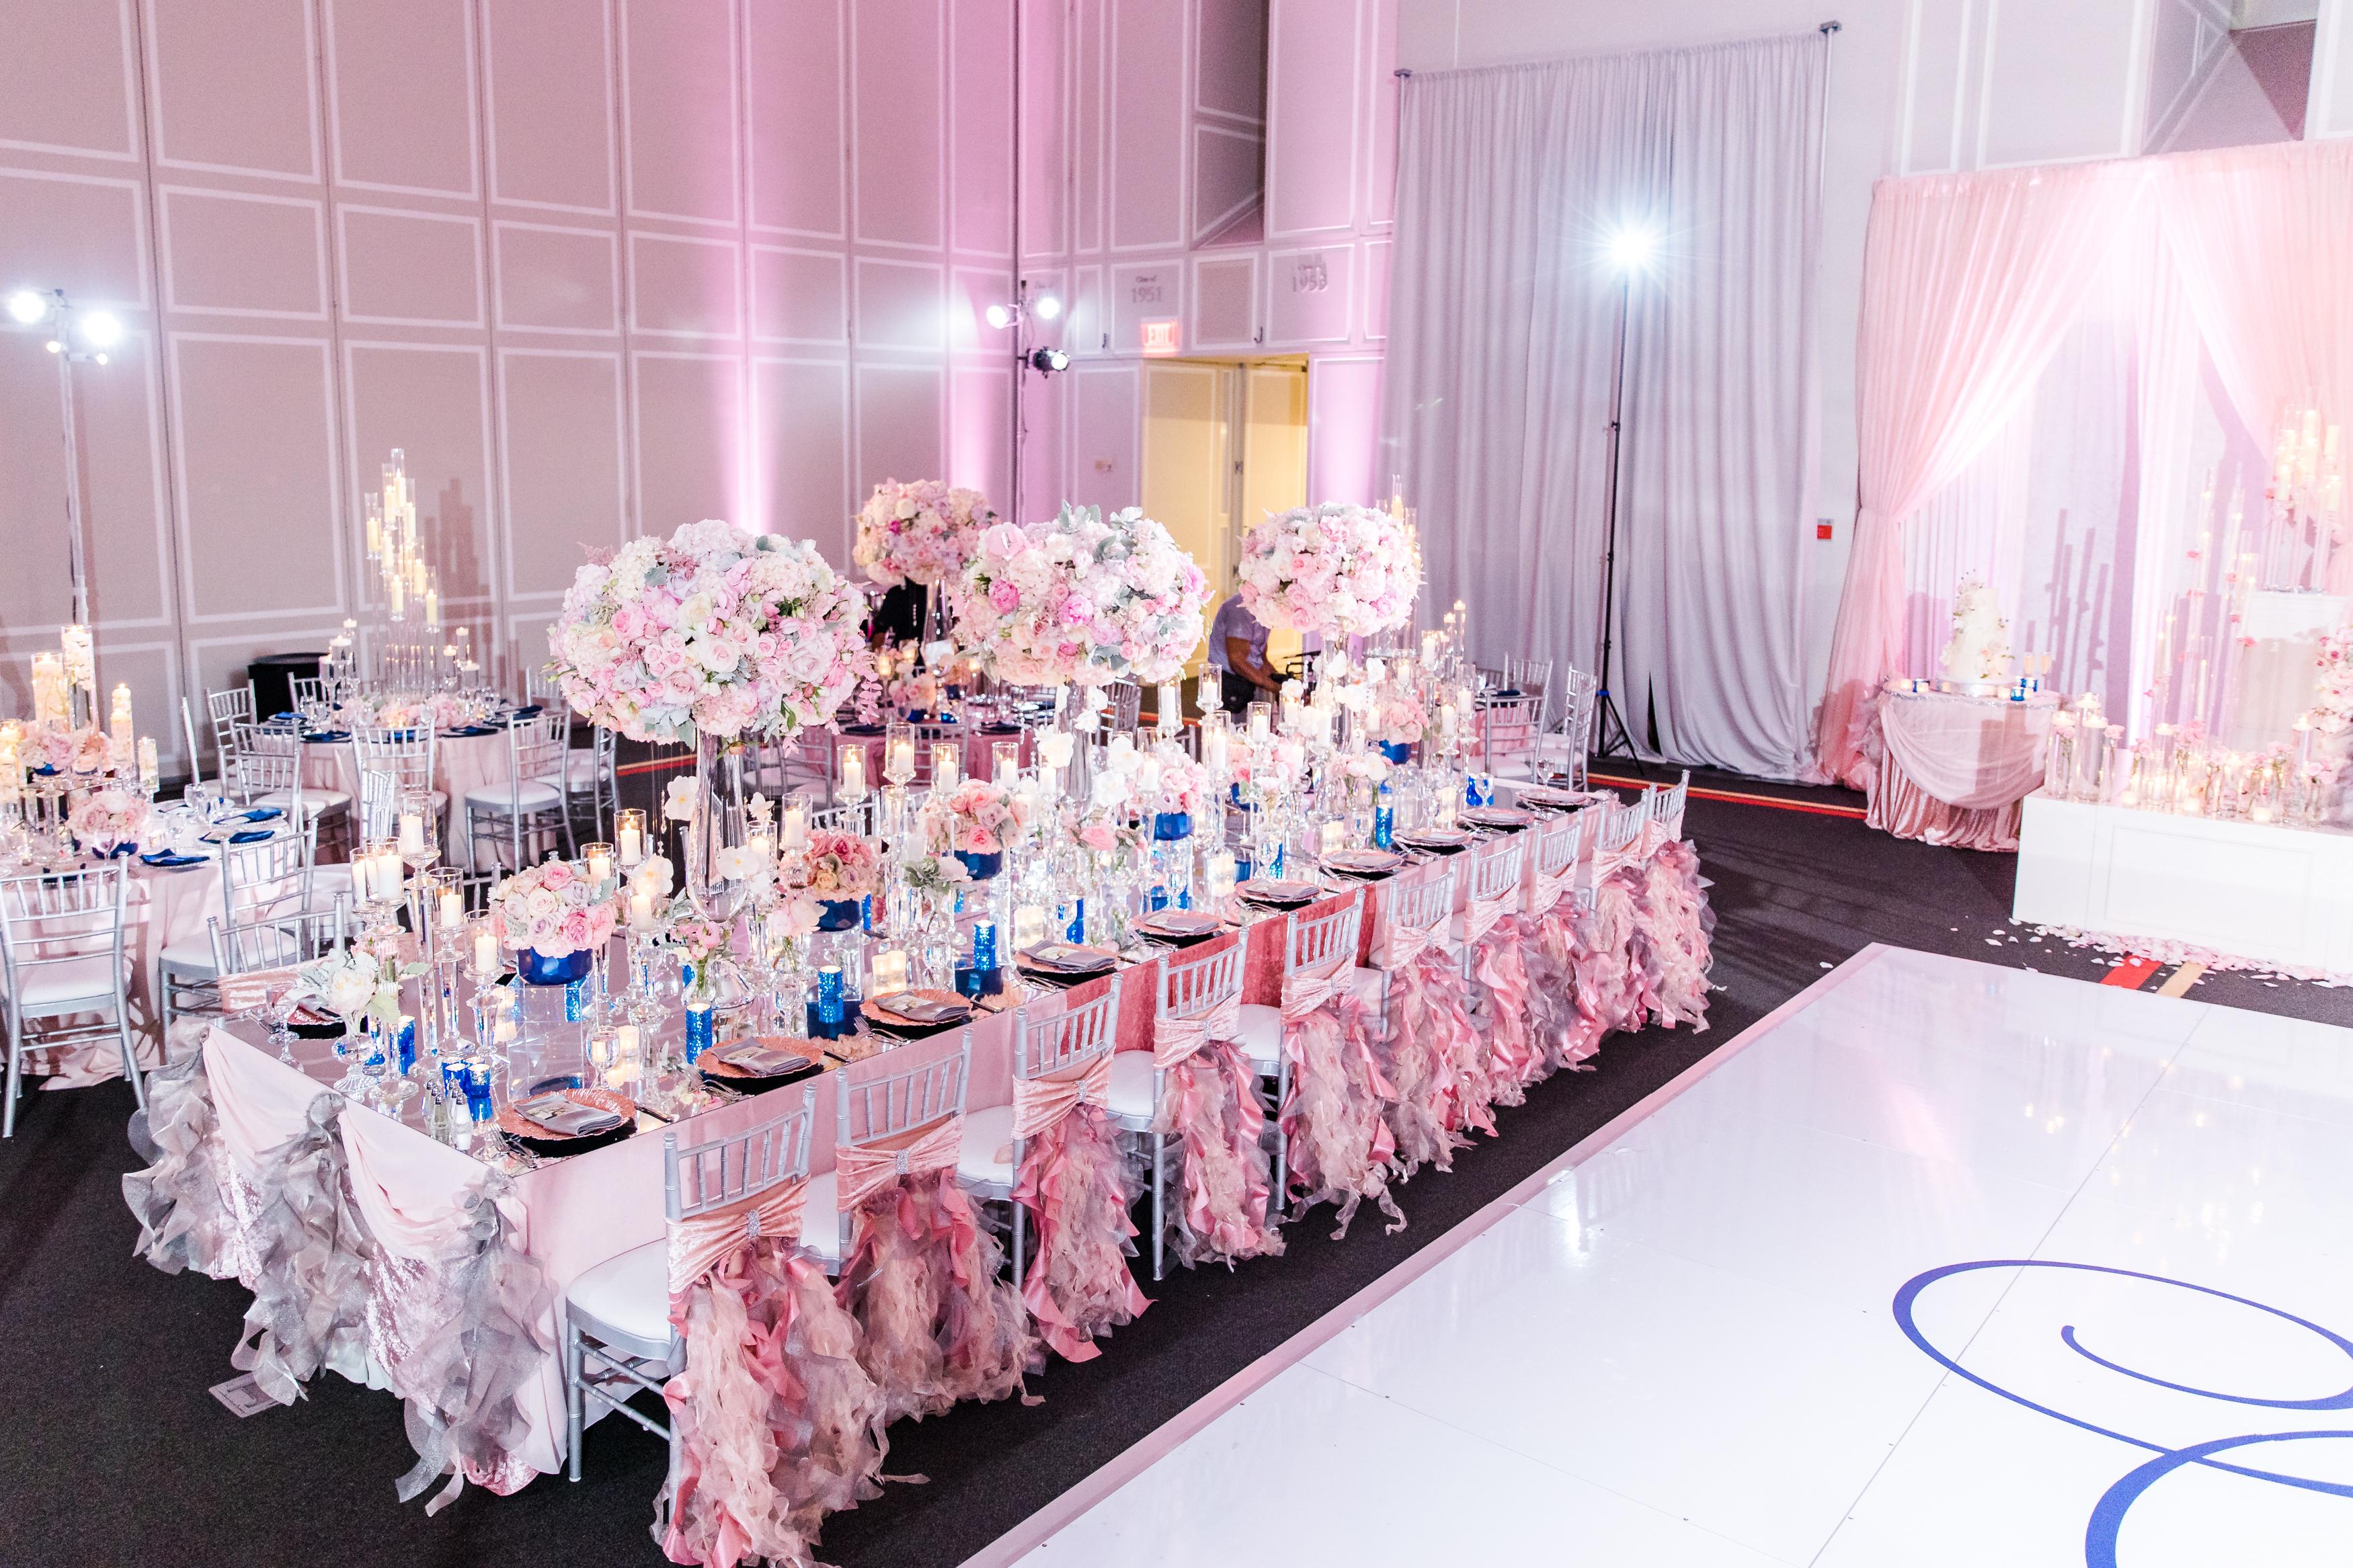 Dance floor and kings table draped in pink, white and blue